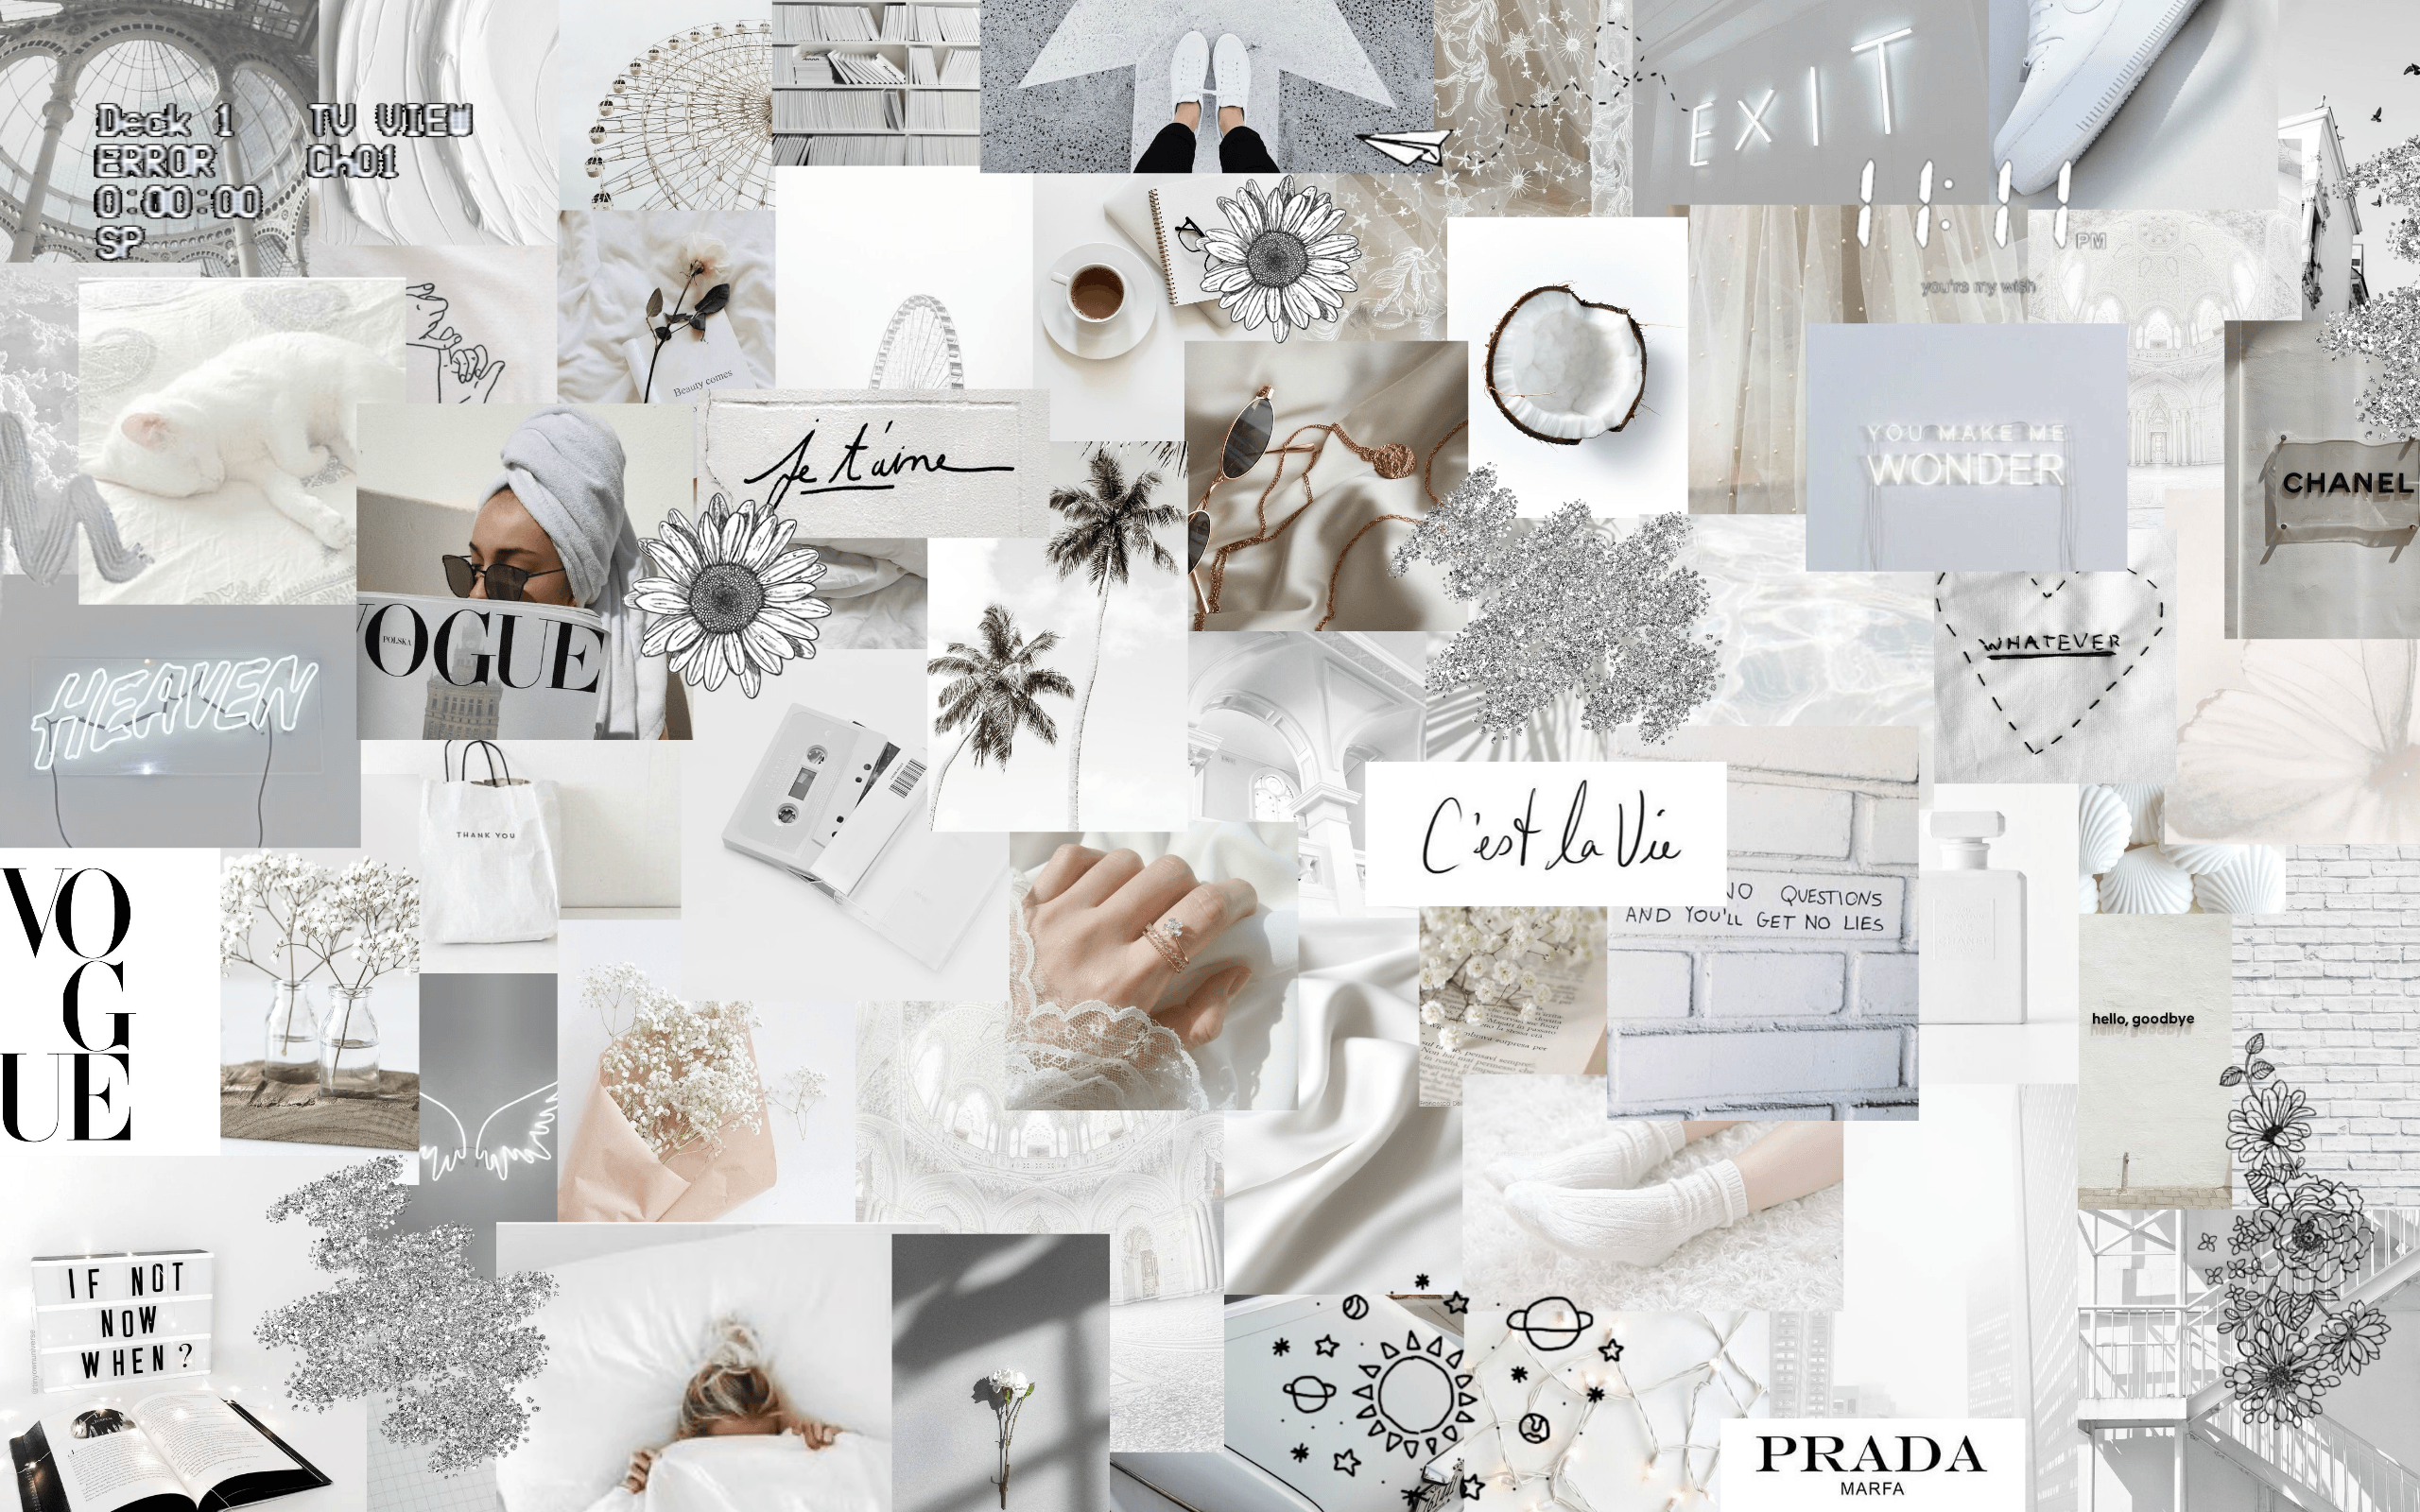 A collage of pictures with white backgrounds - Chanel, silver